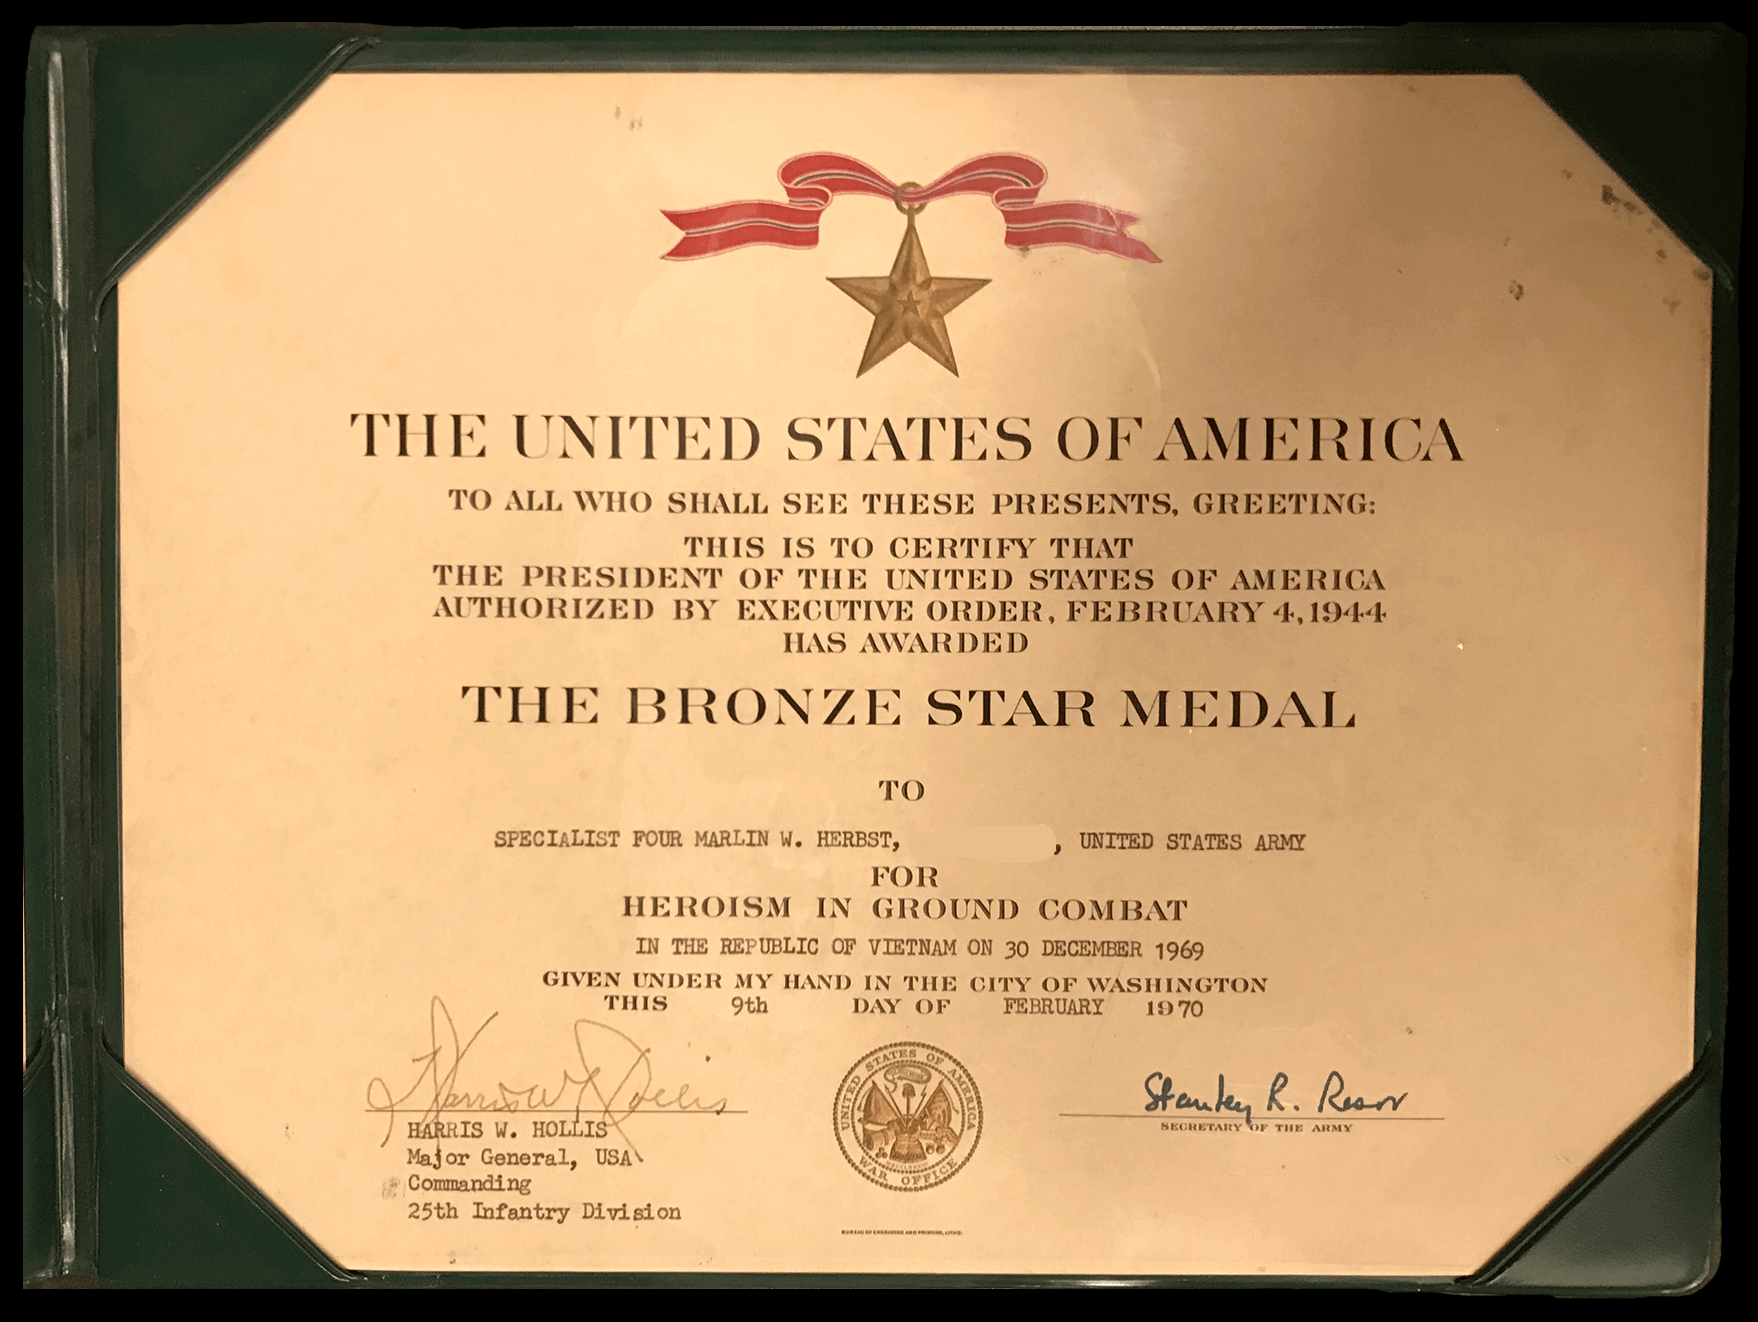 Certificate for a Bronze Star Medal, presented to Marlin Herbst on 2-9-1970.